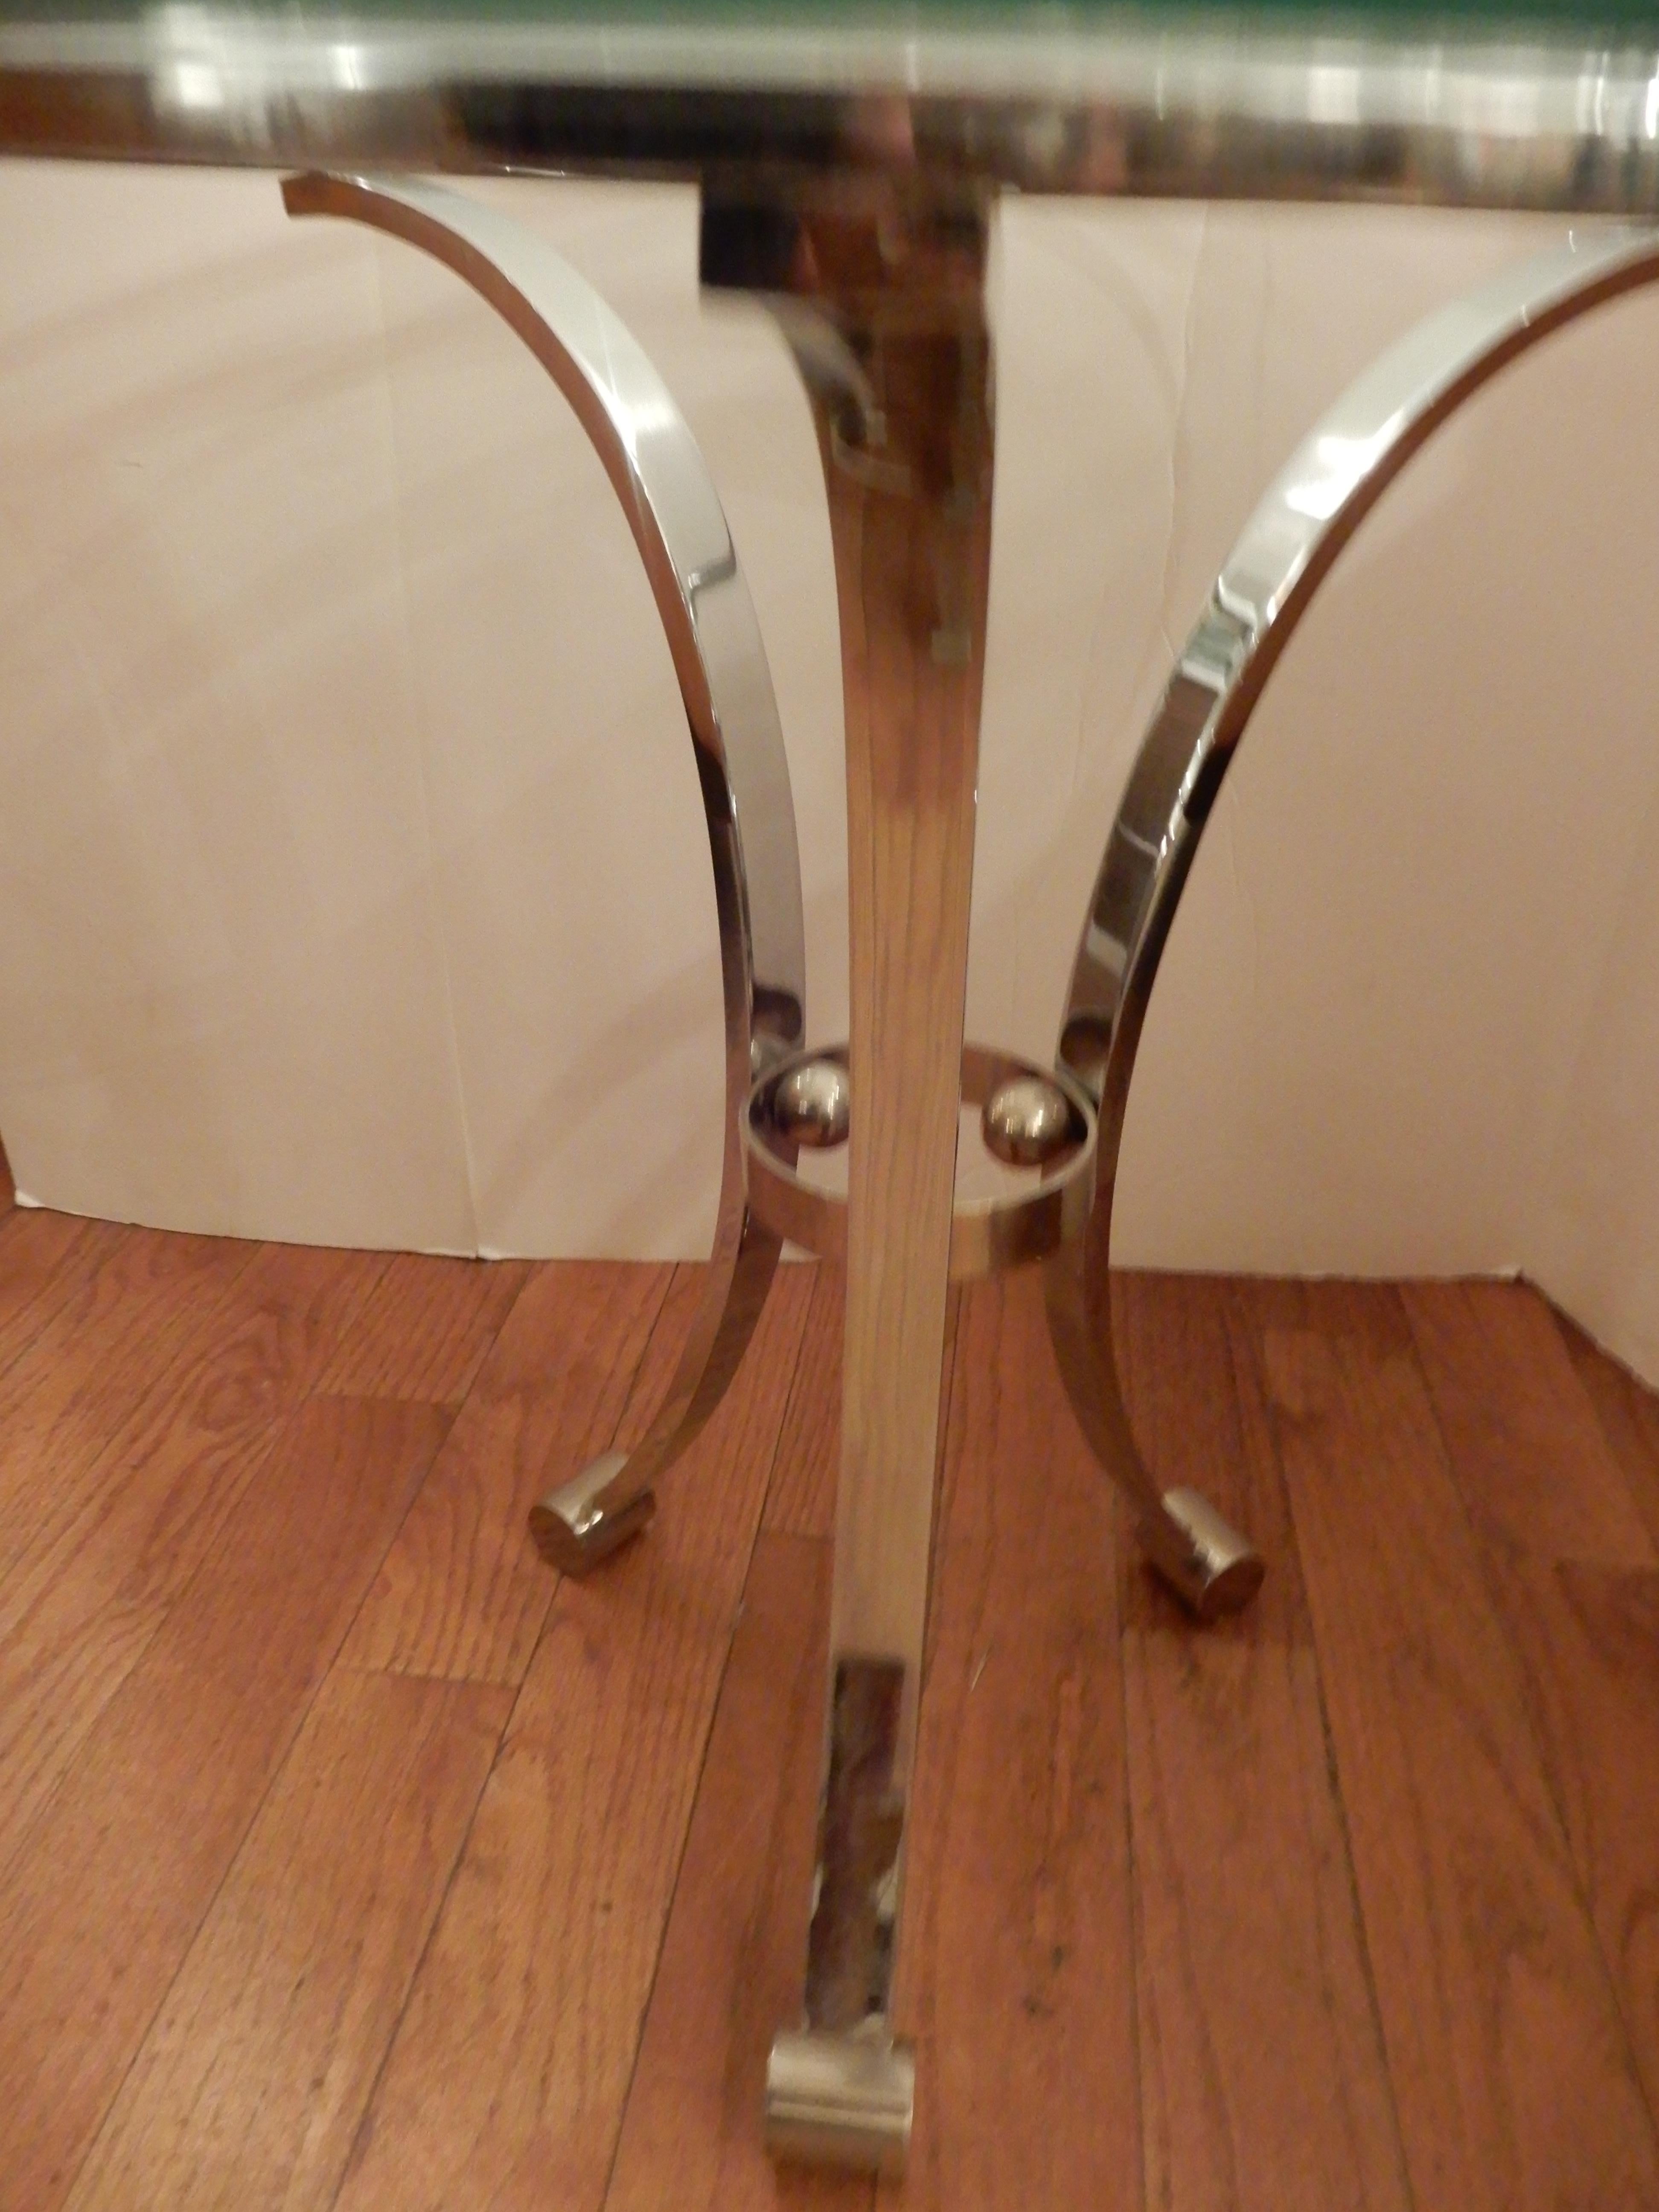 A curvaceous chrome and glass Mid-Century Modern side table, end table, fabulous details throughout, turned feet, three sphere's in center, an interesting and useful piece. The glass is 1/2 inch thick, heavy chrome base.